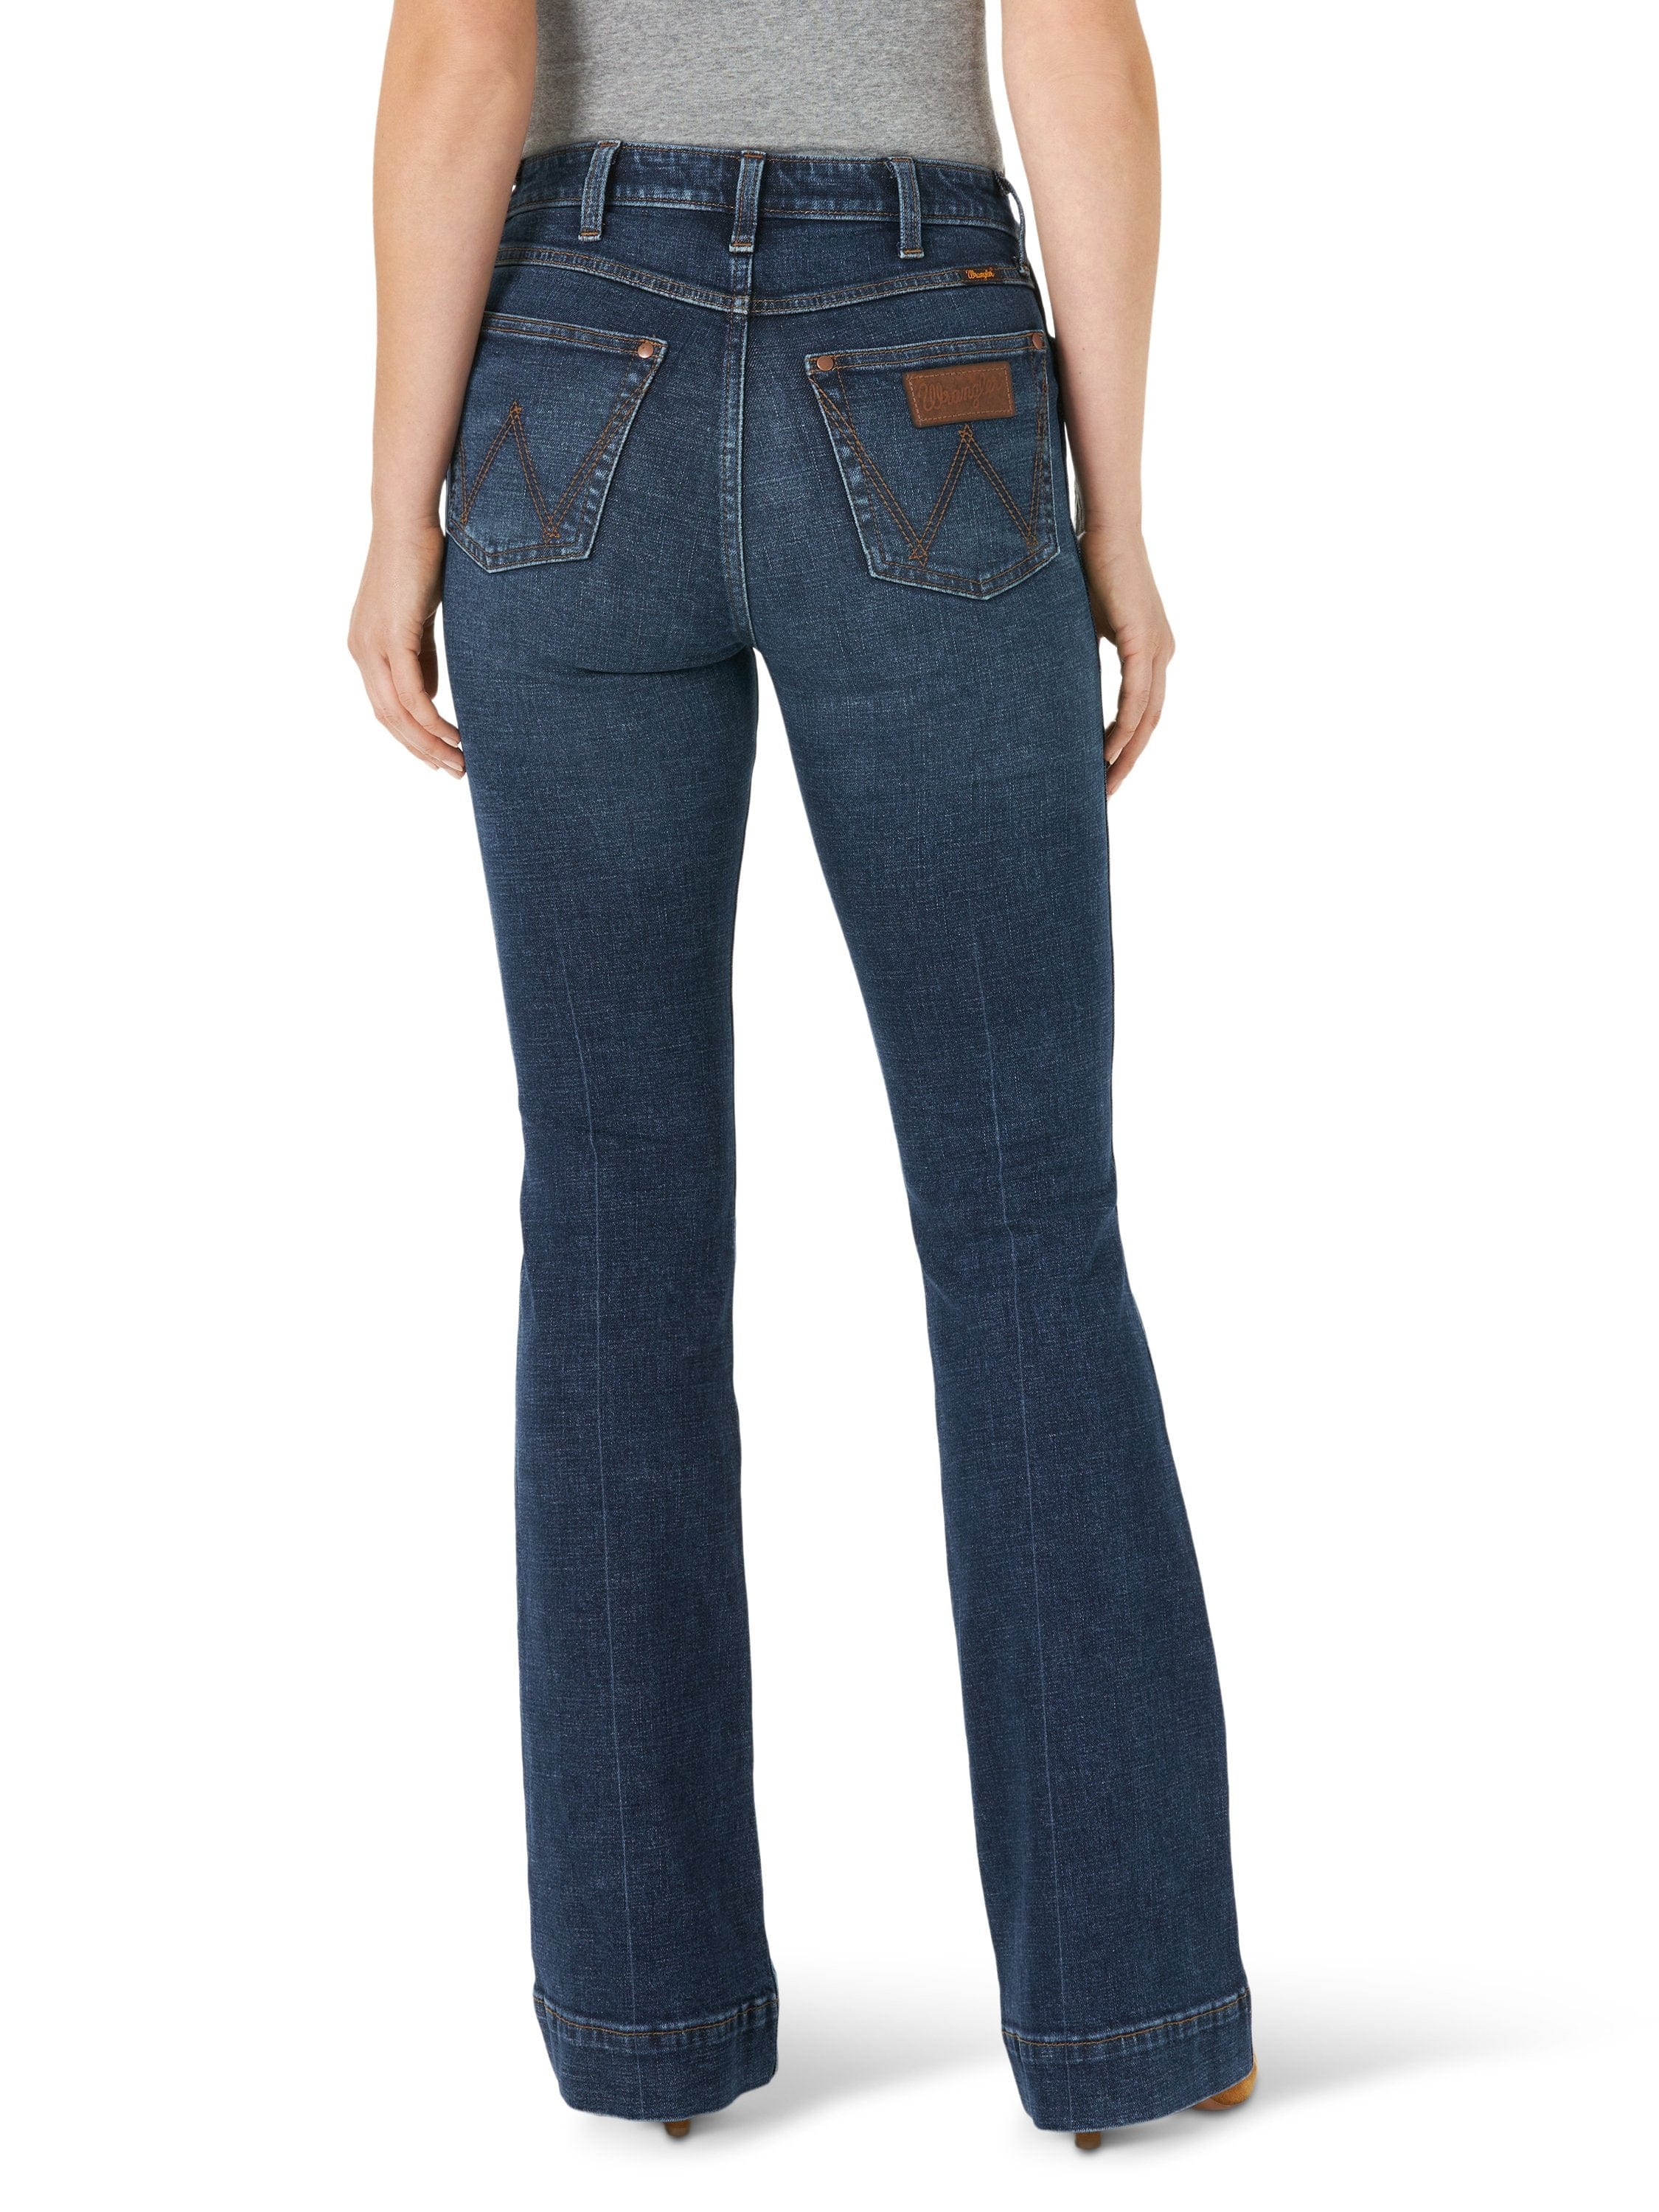 Ladies Ariat Tyra Wide Trouser Jean | Western Ranch Supply